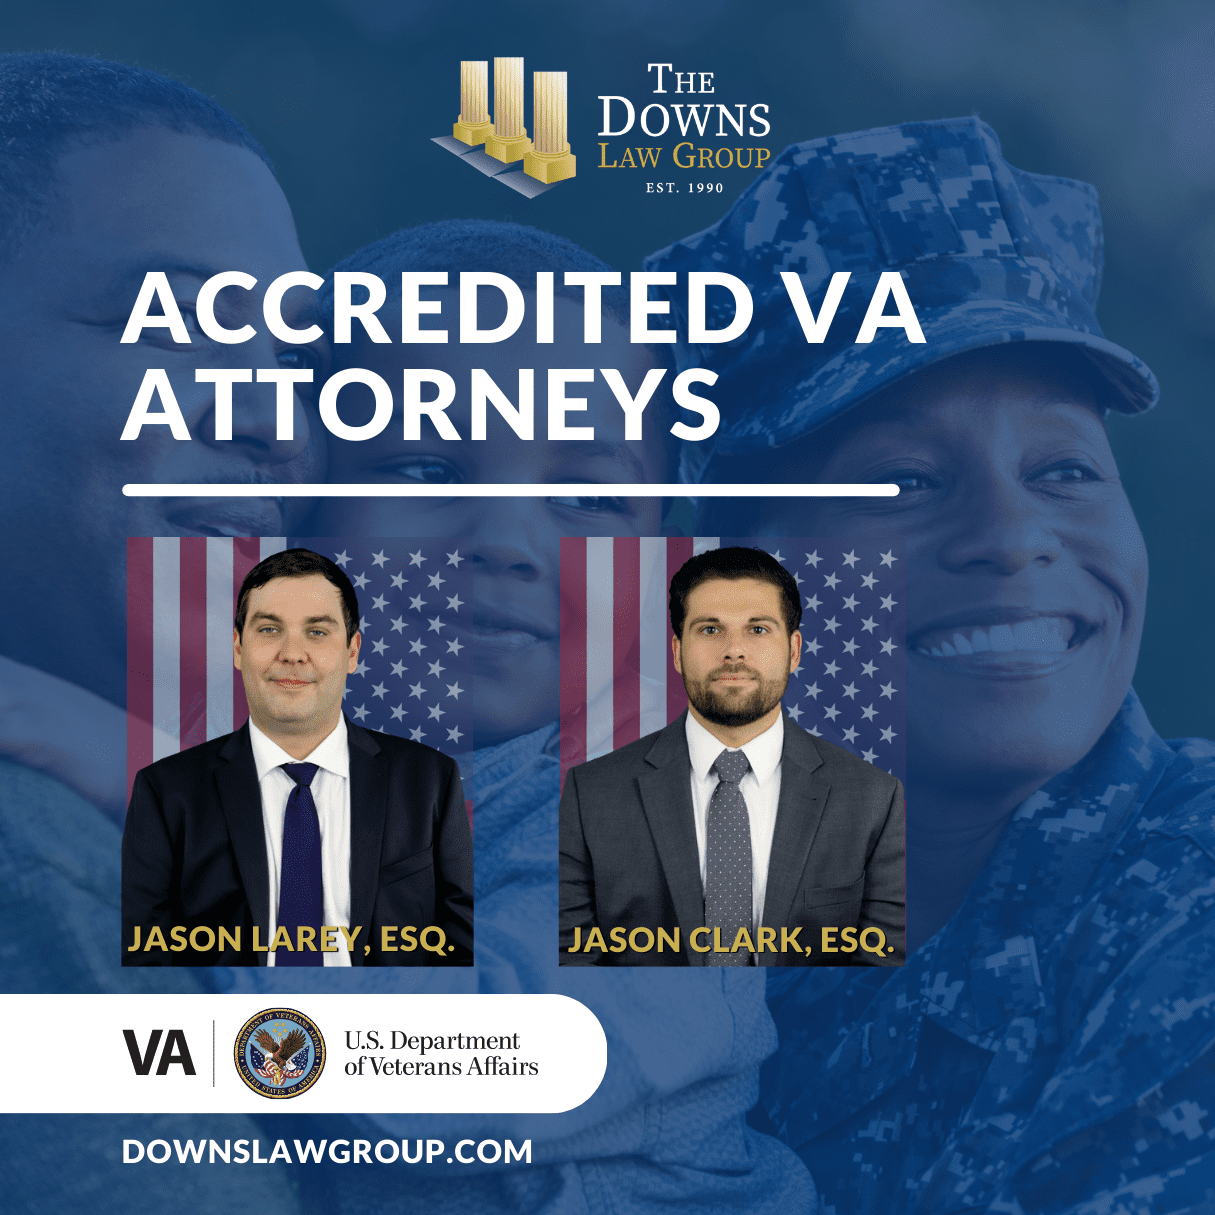 Photo of Jason Clark and Jason Larey announcing they are accredited VA attorneys